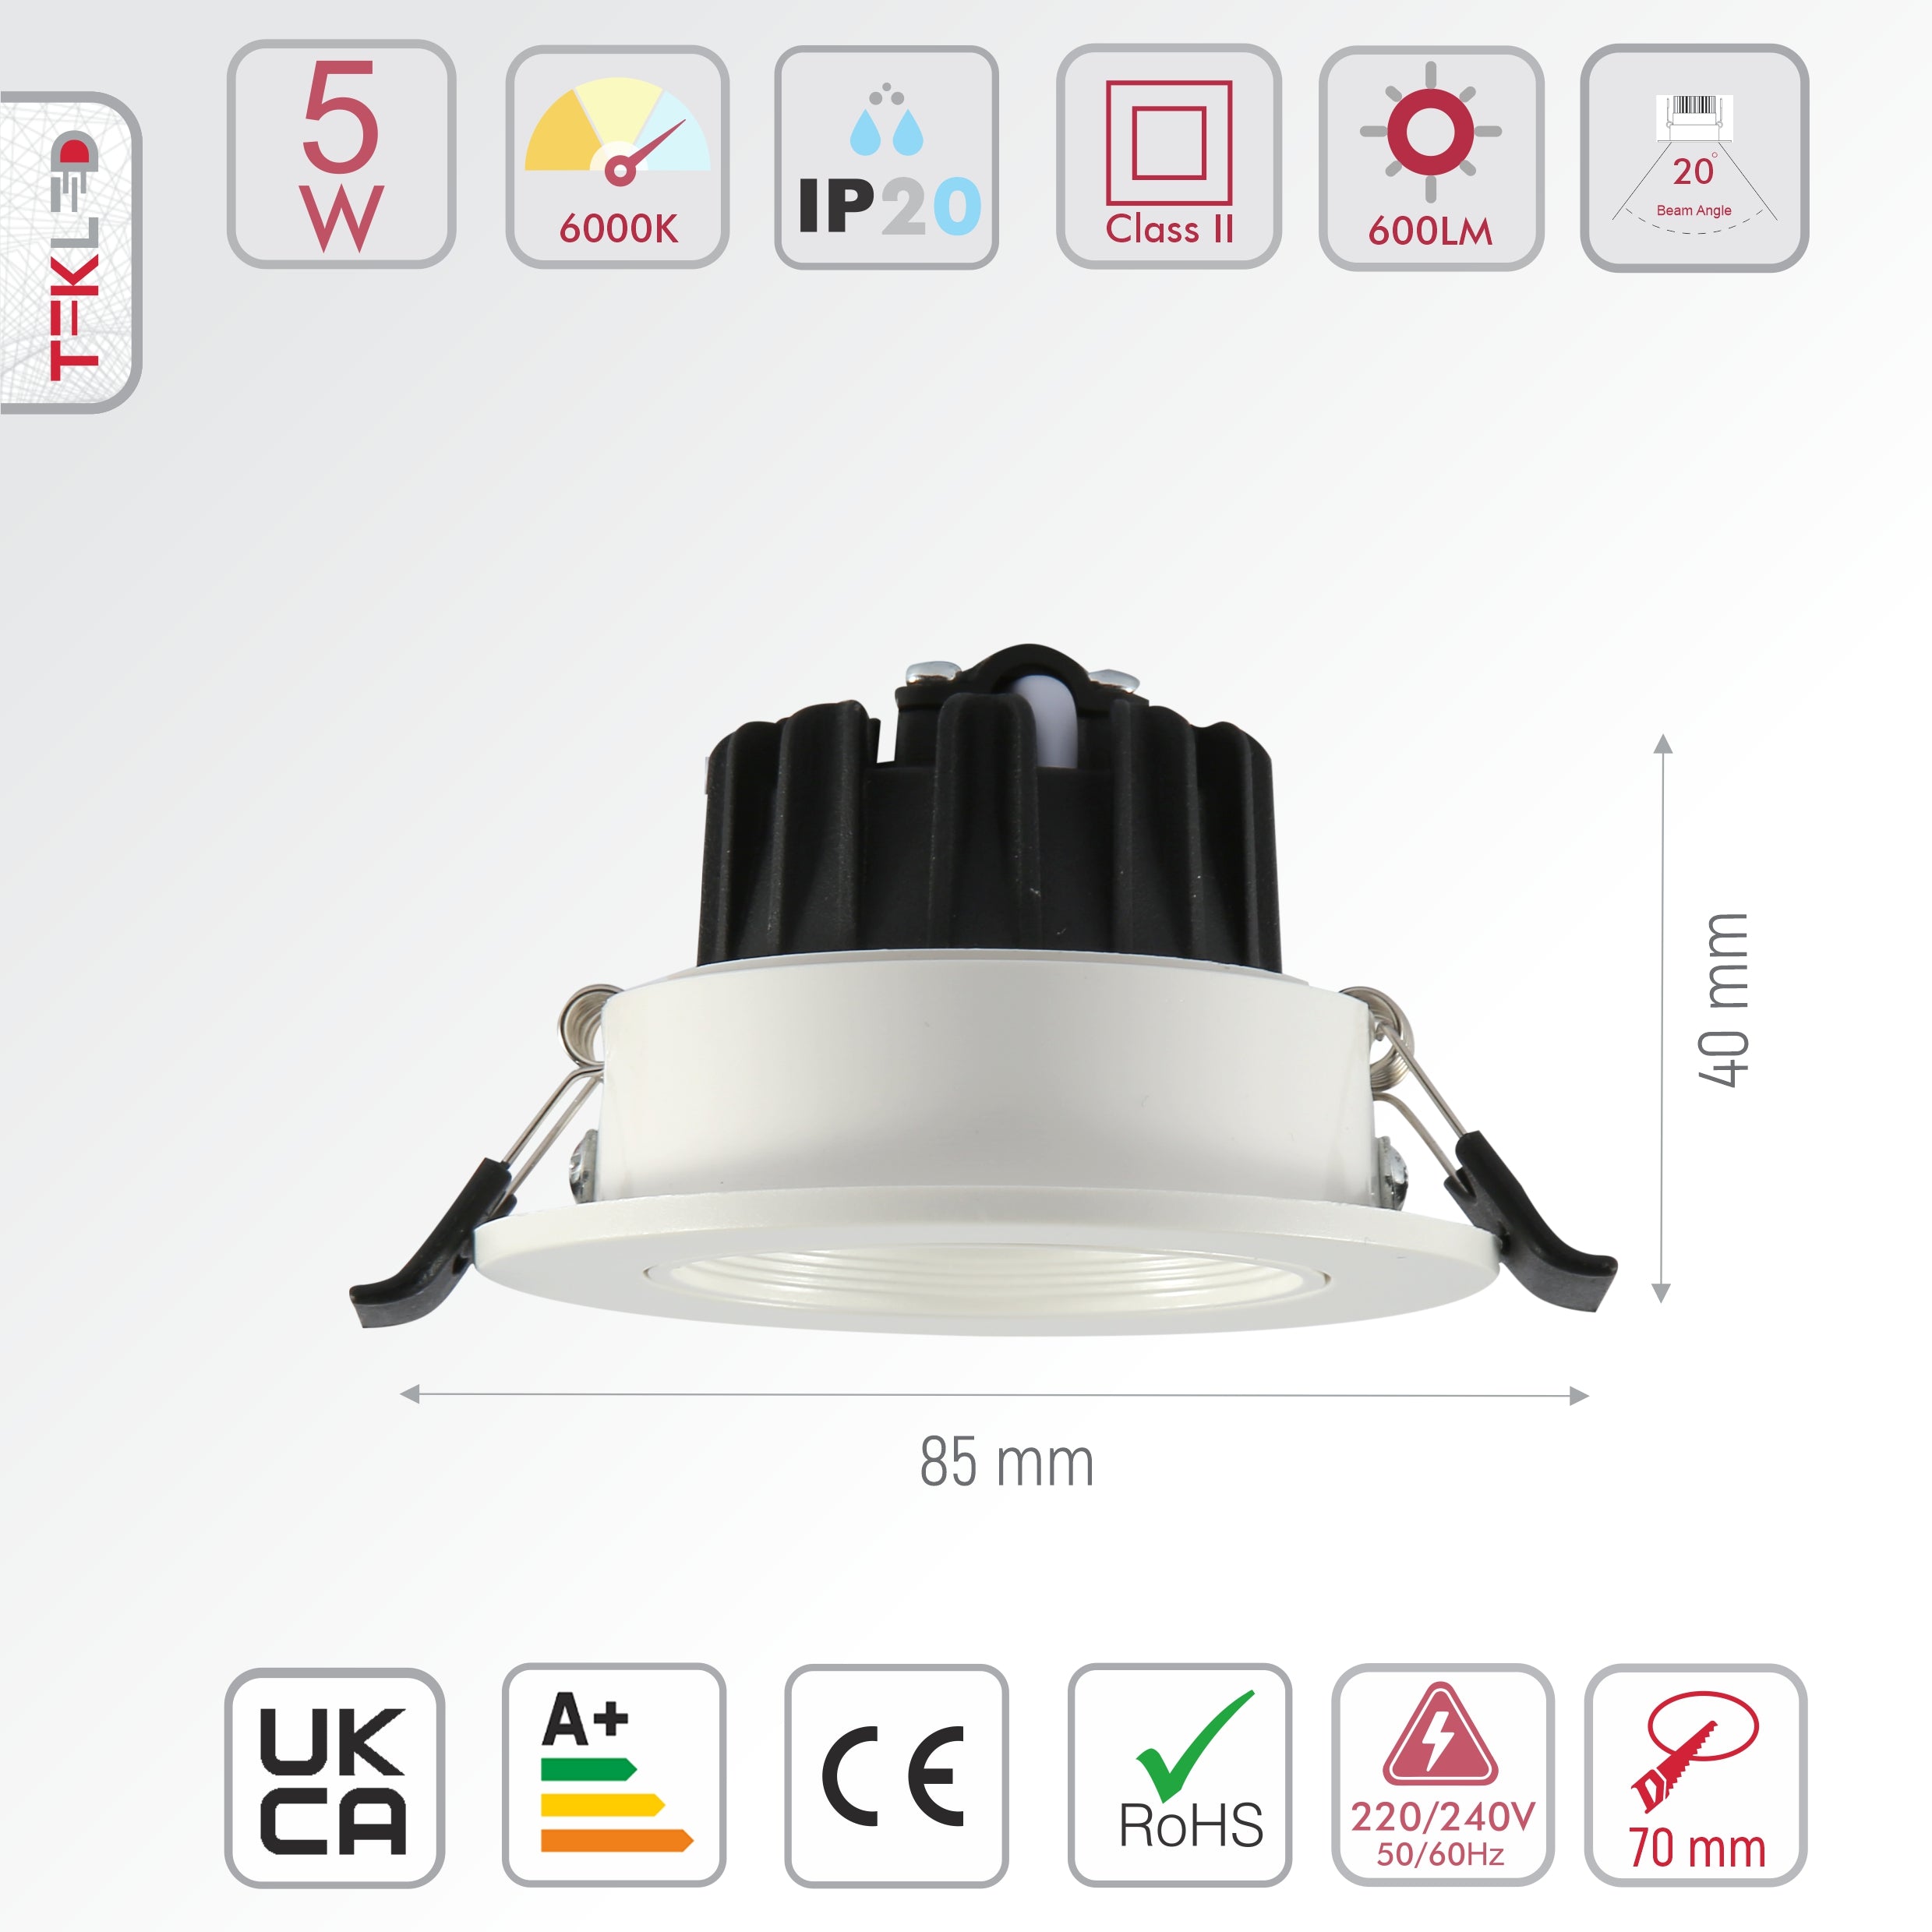 Size and specs of LED COB Recessed Downlight 5W Cool Daylight 6000K White | TEKLED 145-03084